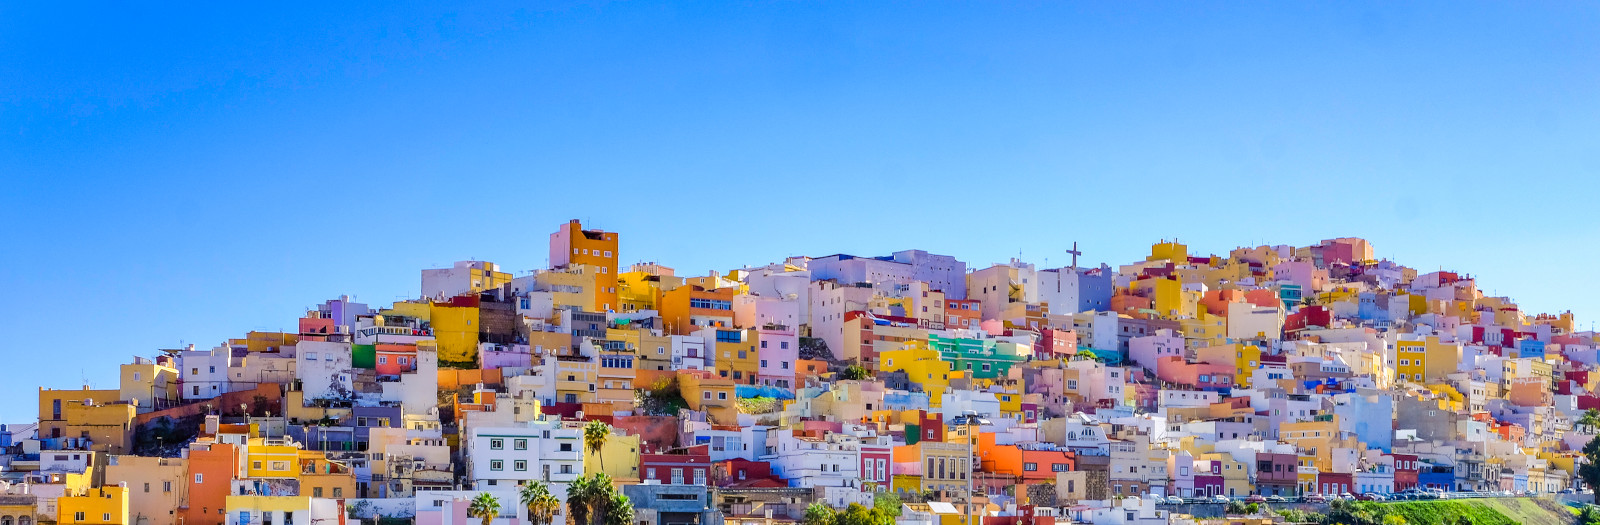 View of the colourful houses in Las Palmas, Gran Canaria